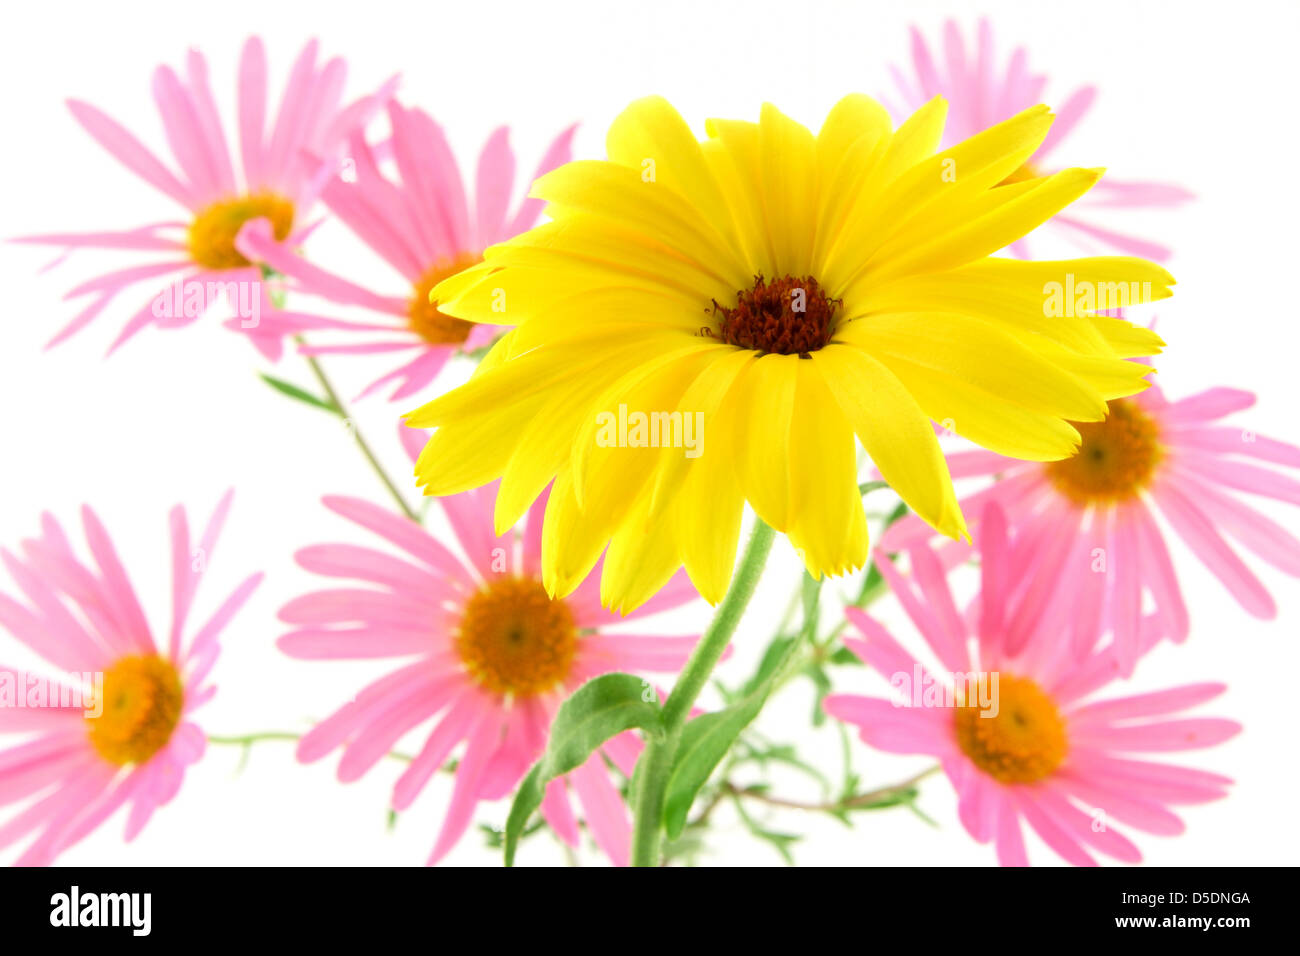 Sunny yellow flower (gerbera daisy) with pink ones in the background. Focus on yellow flower. Stock Photo